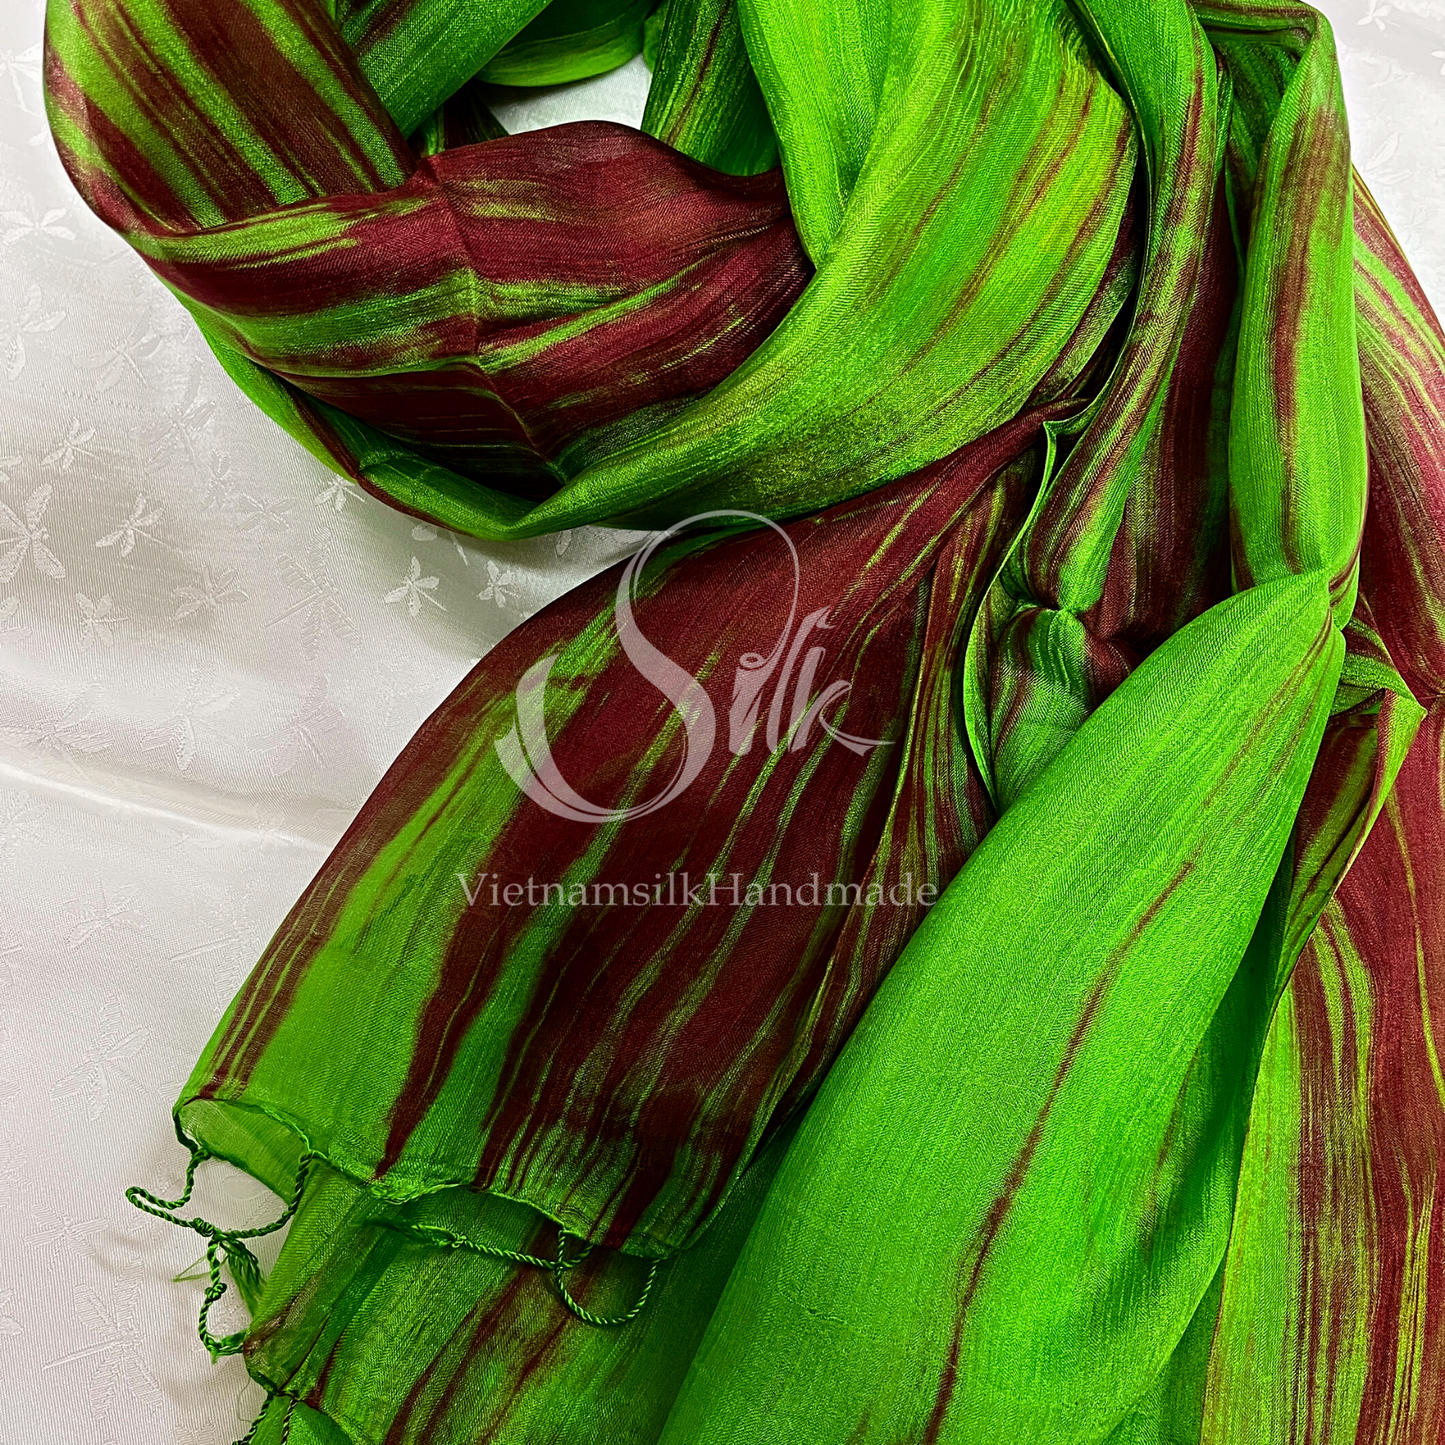 SILK SCARF| Hand-dyed silk|100% NaturalMulberry silk| Mixed Colors Scarves | Handmade Scarves| Hand-painted Scarf| Made in Vietnam